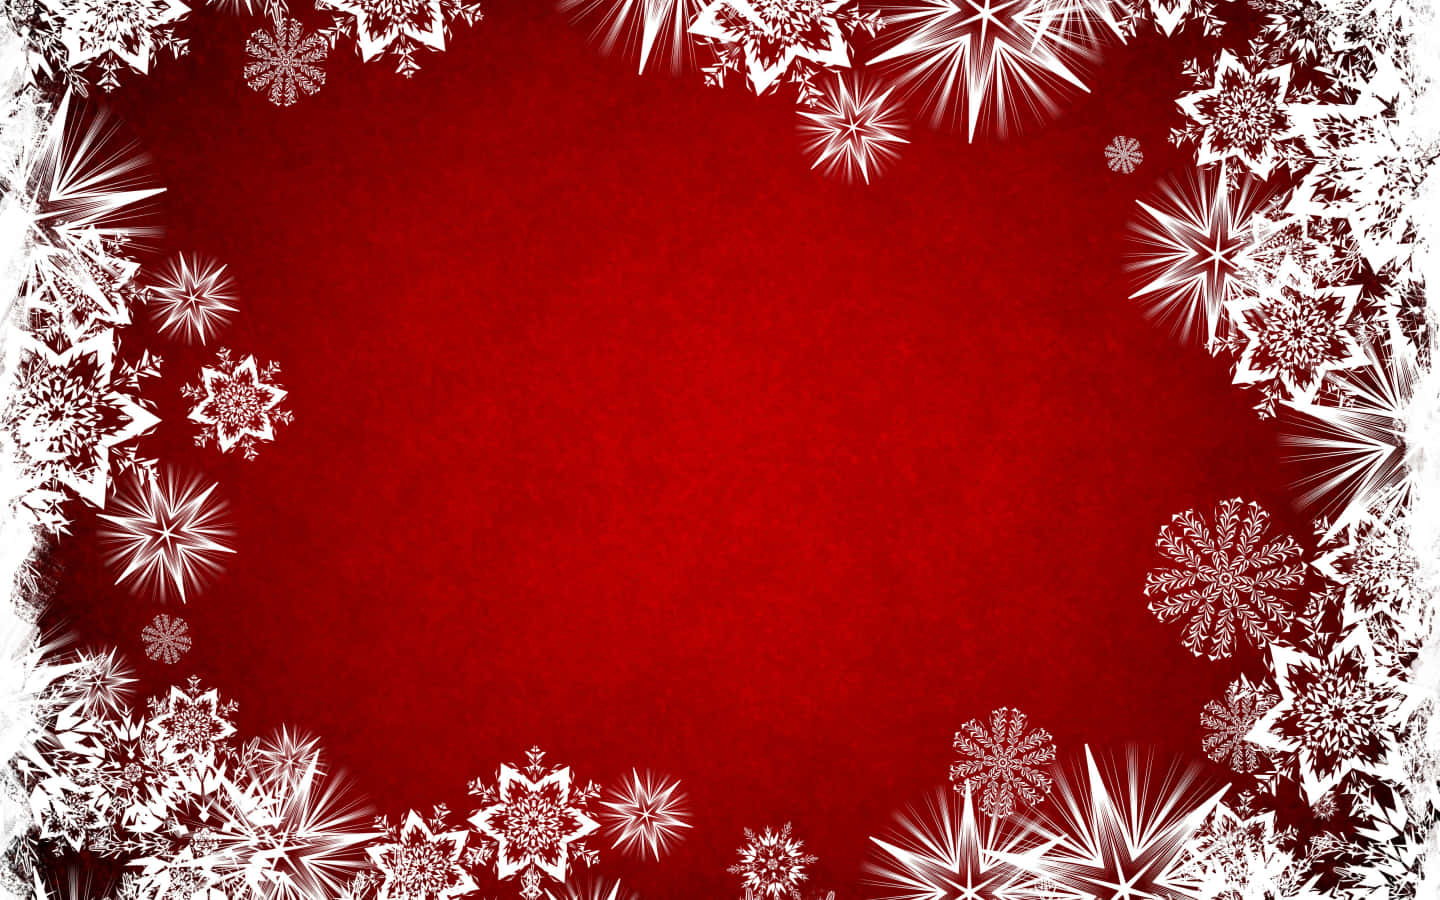 Christmas Background With Snowflakes On Red Background